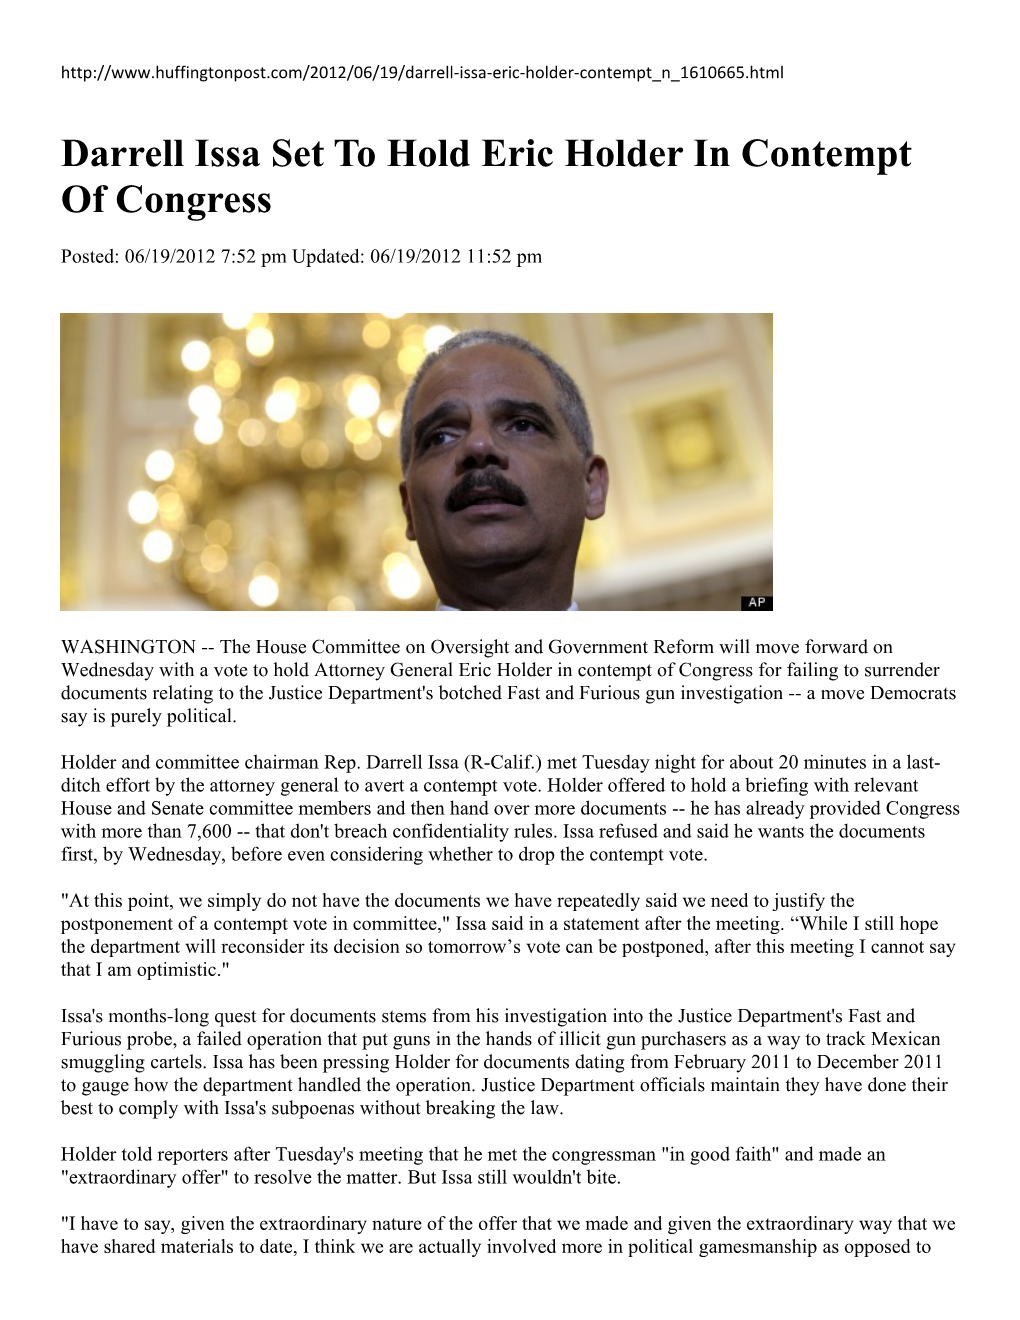 Darrell Issa Set to Hold Eric Holder in Contempt of Congress